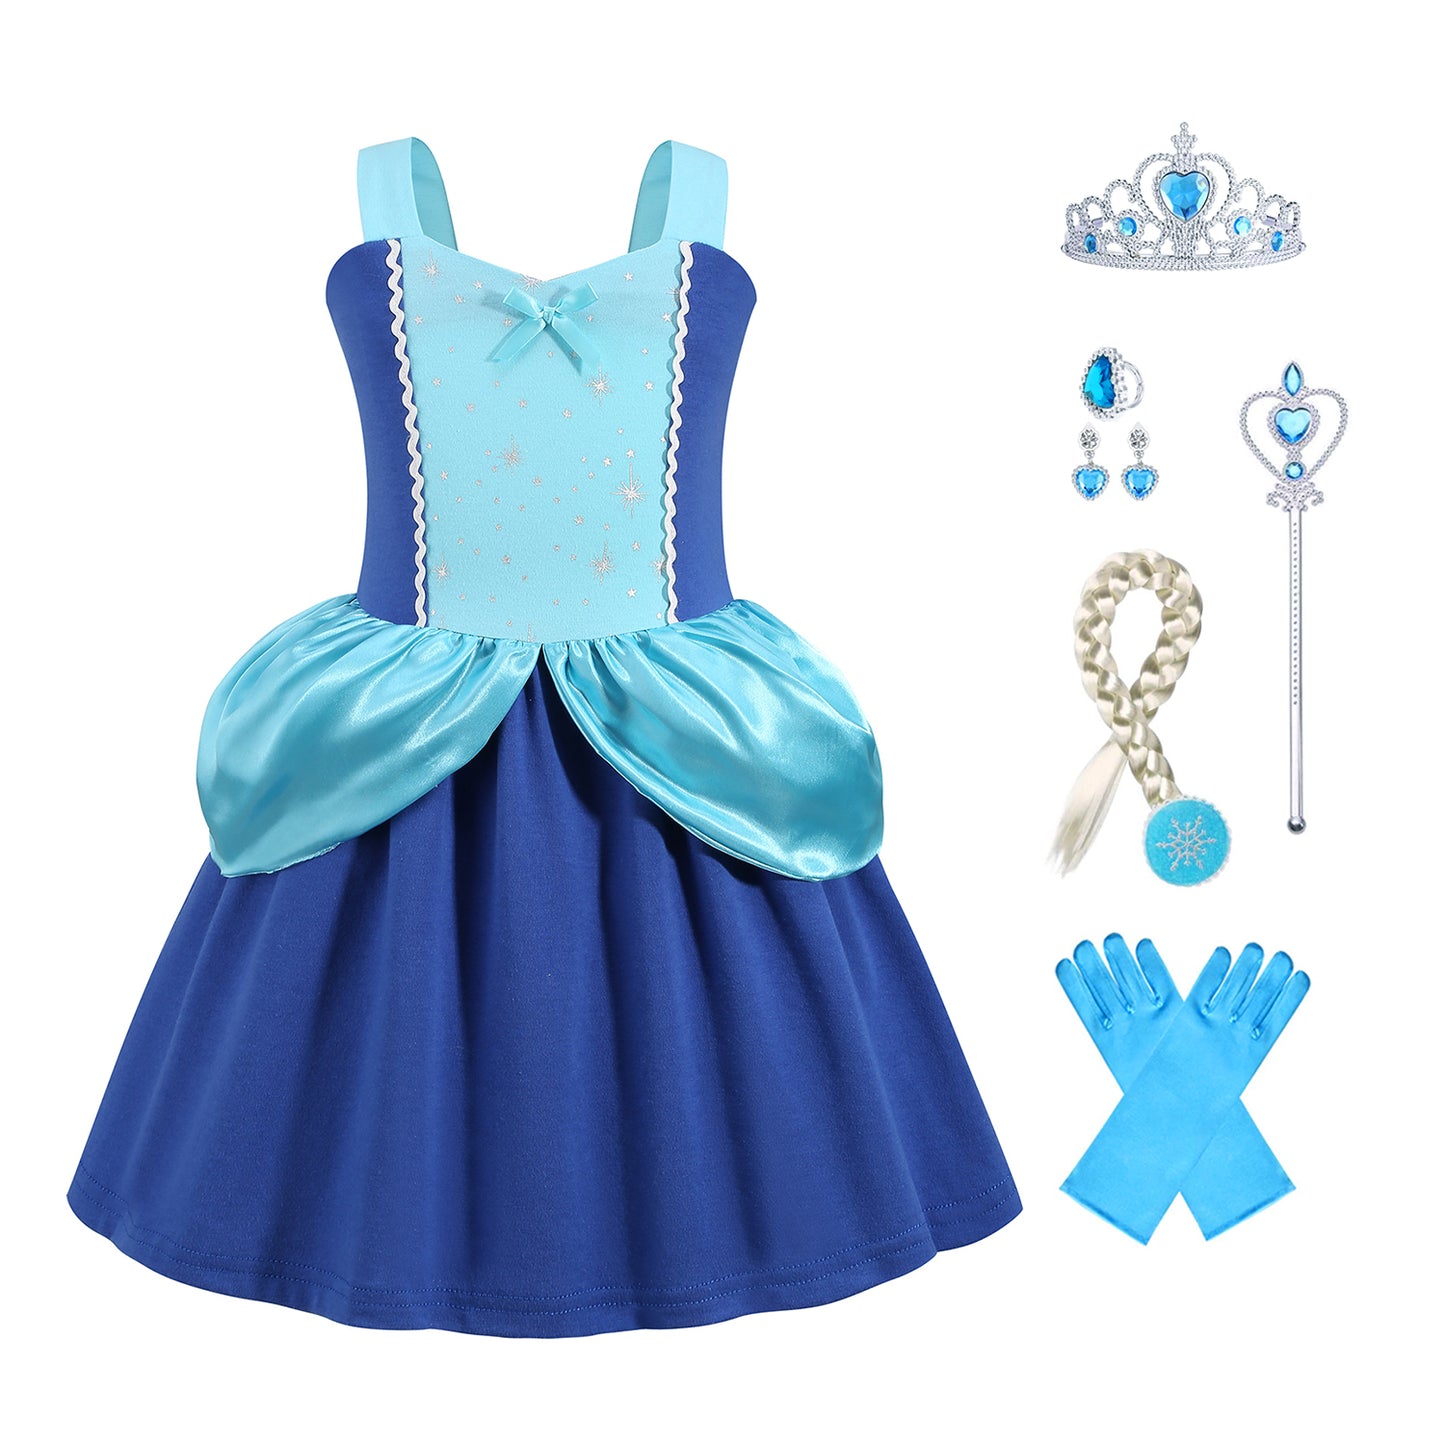 Foierp Girls' Dress for Toddler Princess Blue Costume for Halloween Birthday Party Cosplay